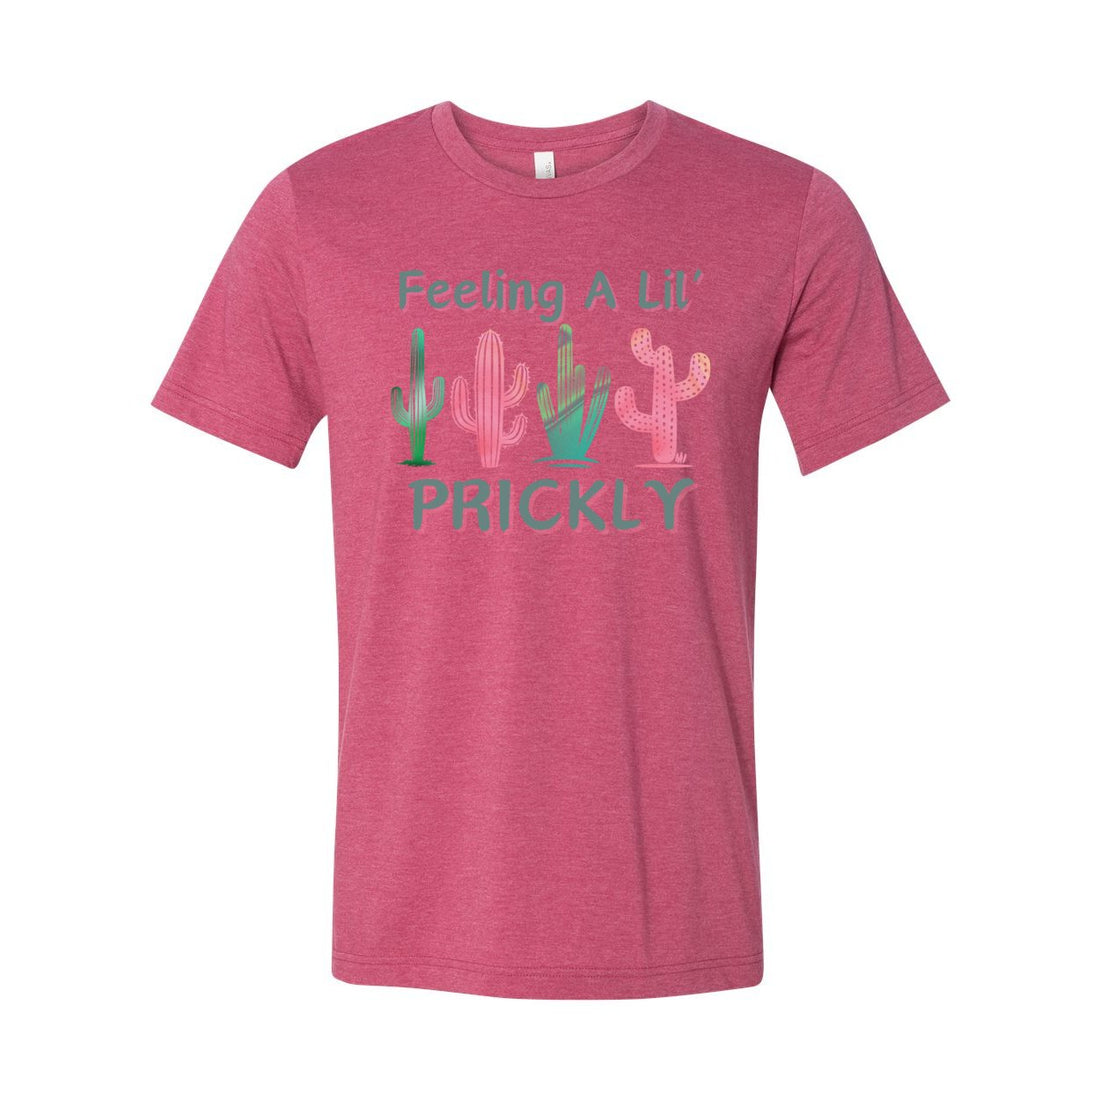 Feelin' A Lil' Prickly Jersey Tee - T-Shirts - Positively Sassy - Feelin' A Lil' Prickly Jersey Tee